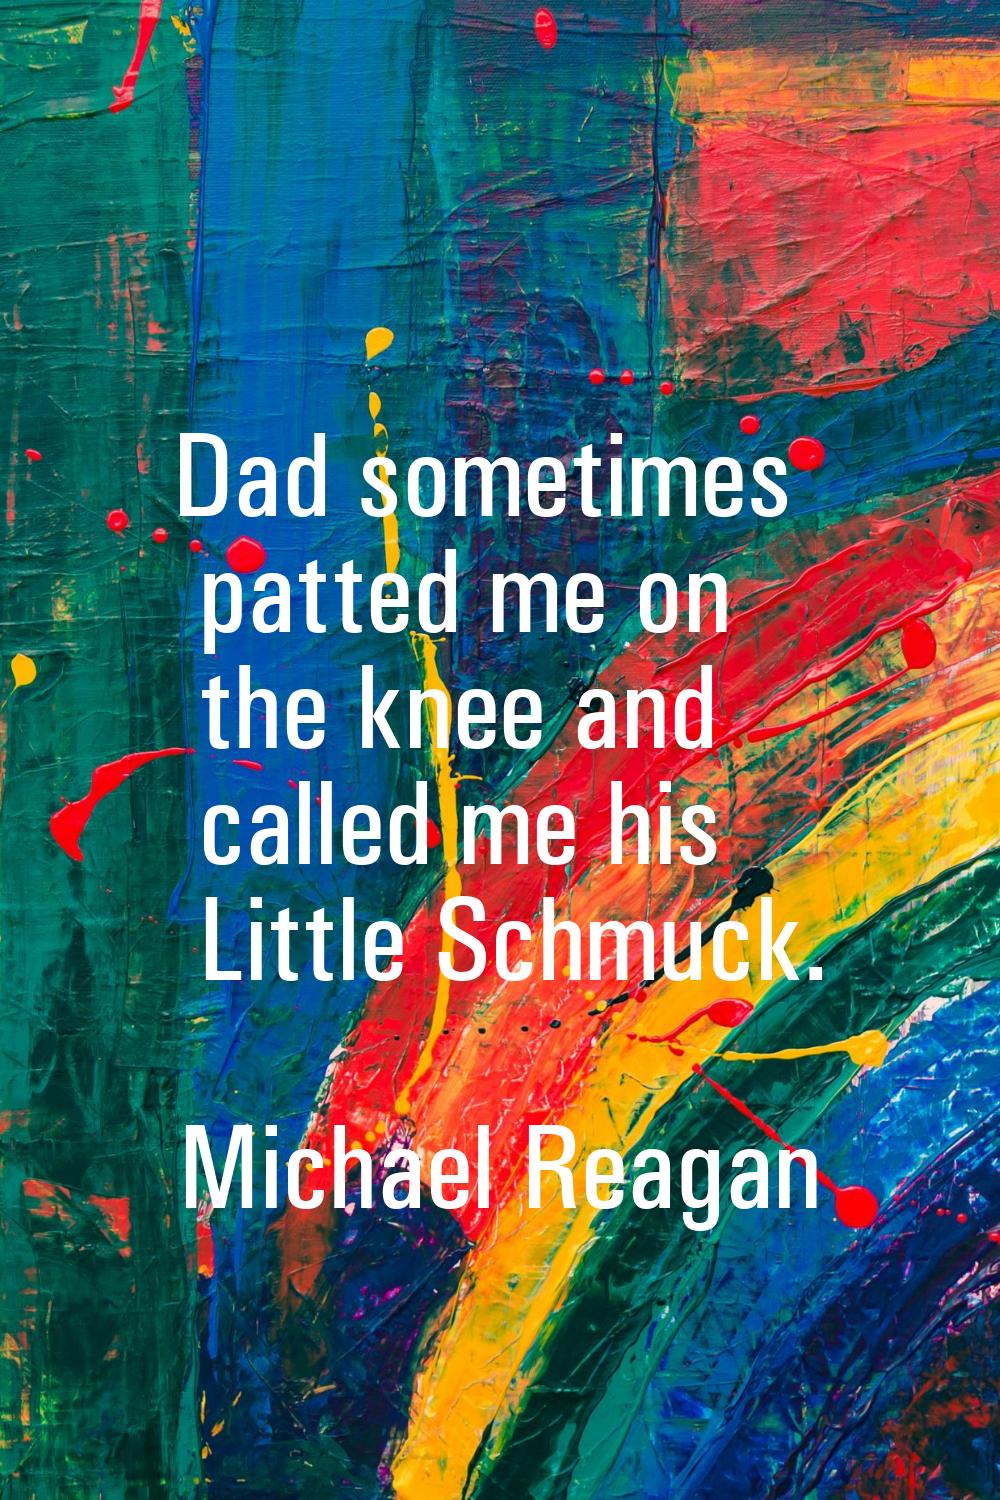 Dad sometimes patted me on the knee and called me his Little Schmuck.